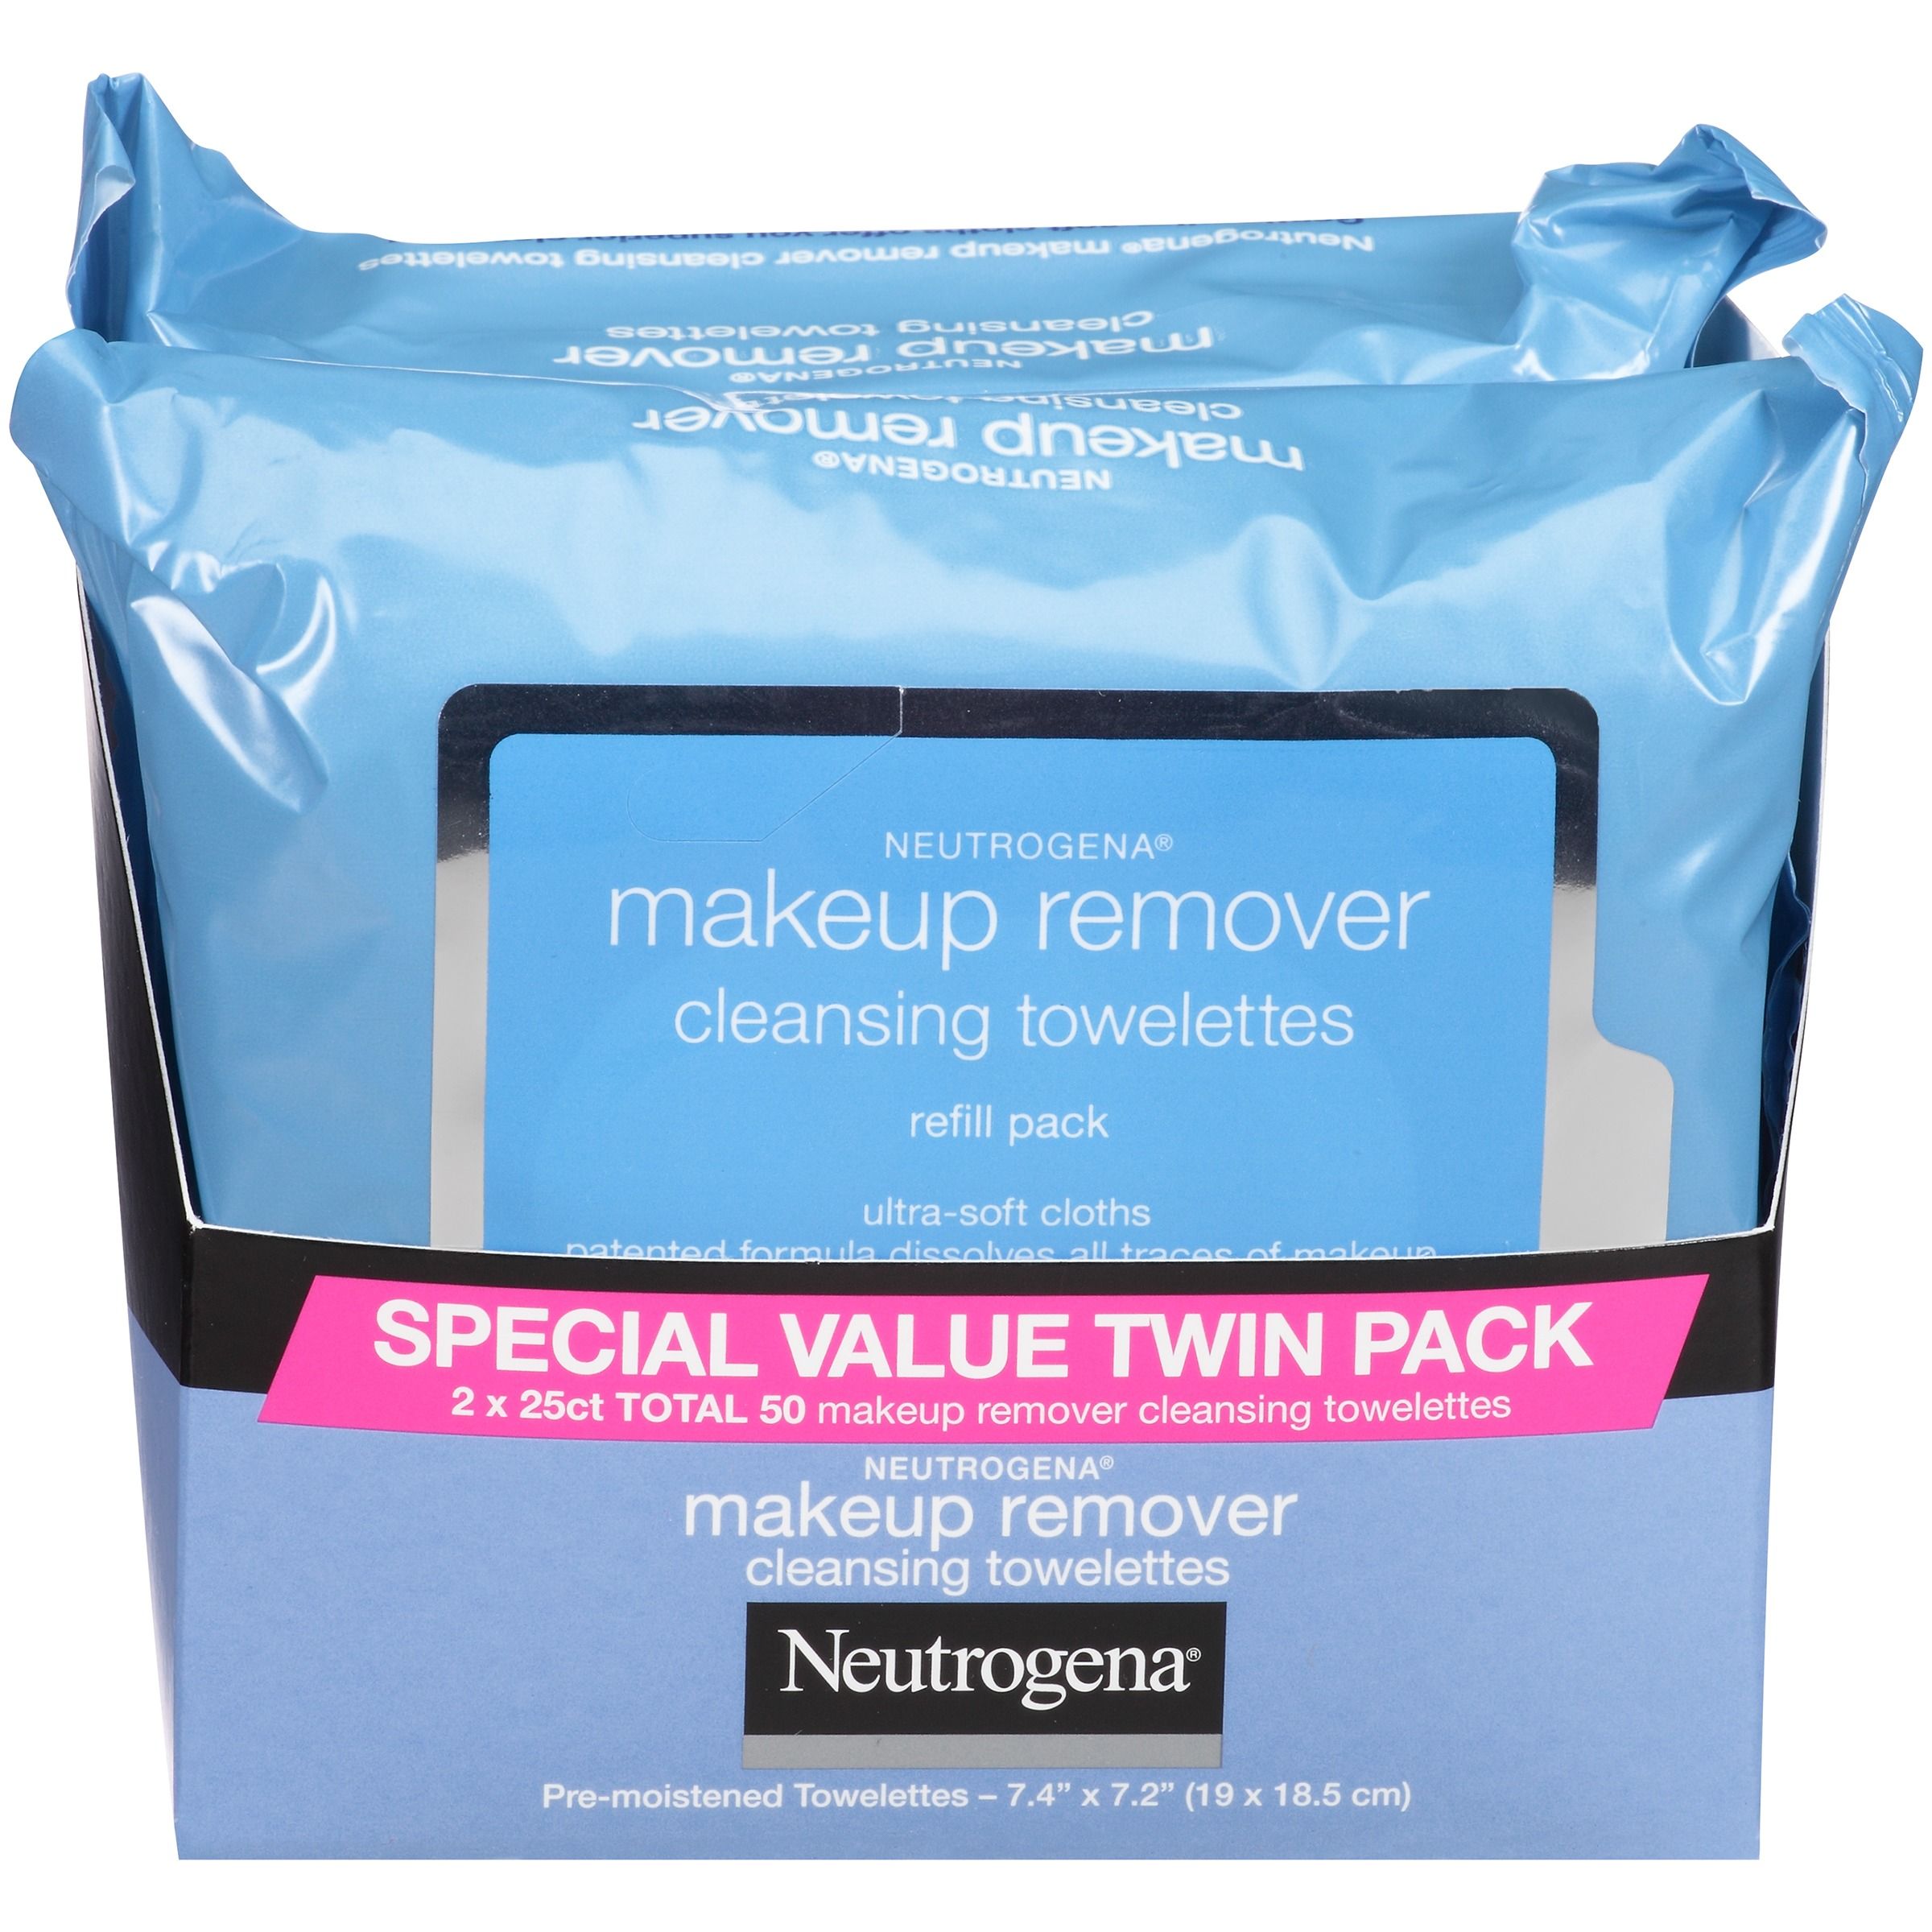 Neutrogena Makeup Remover Cleansing Face Wipes, 25 ct., 2 Pack | Walmart (US)